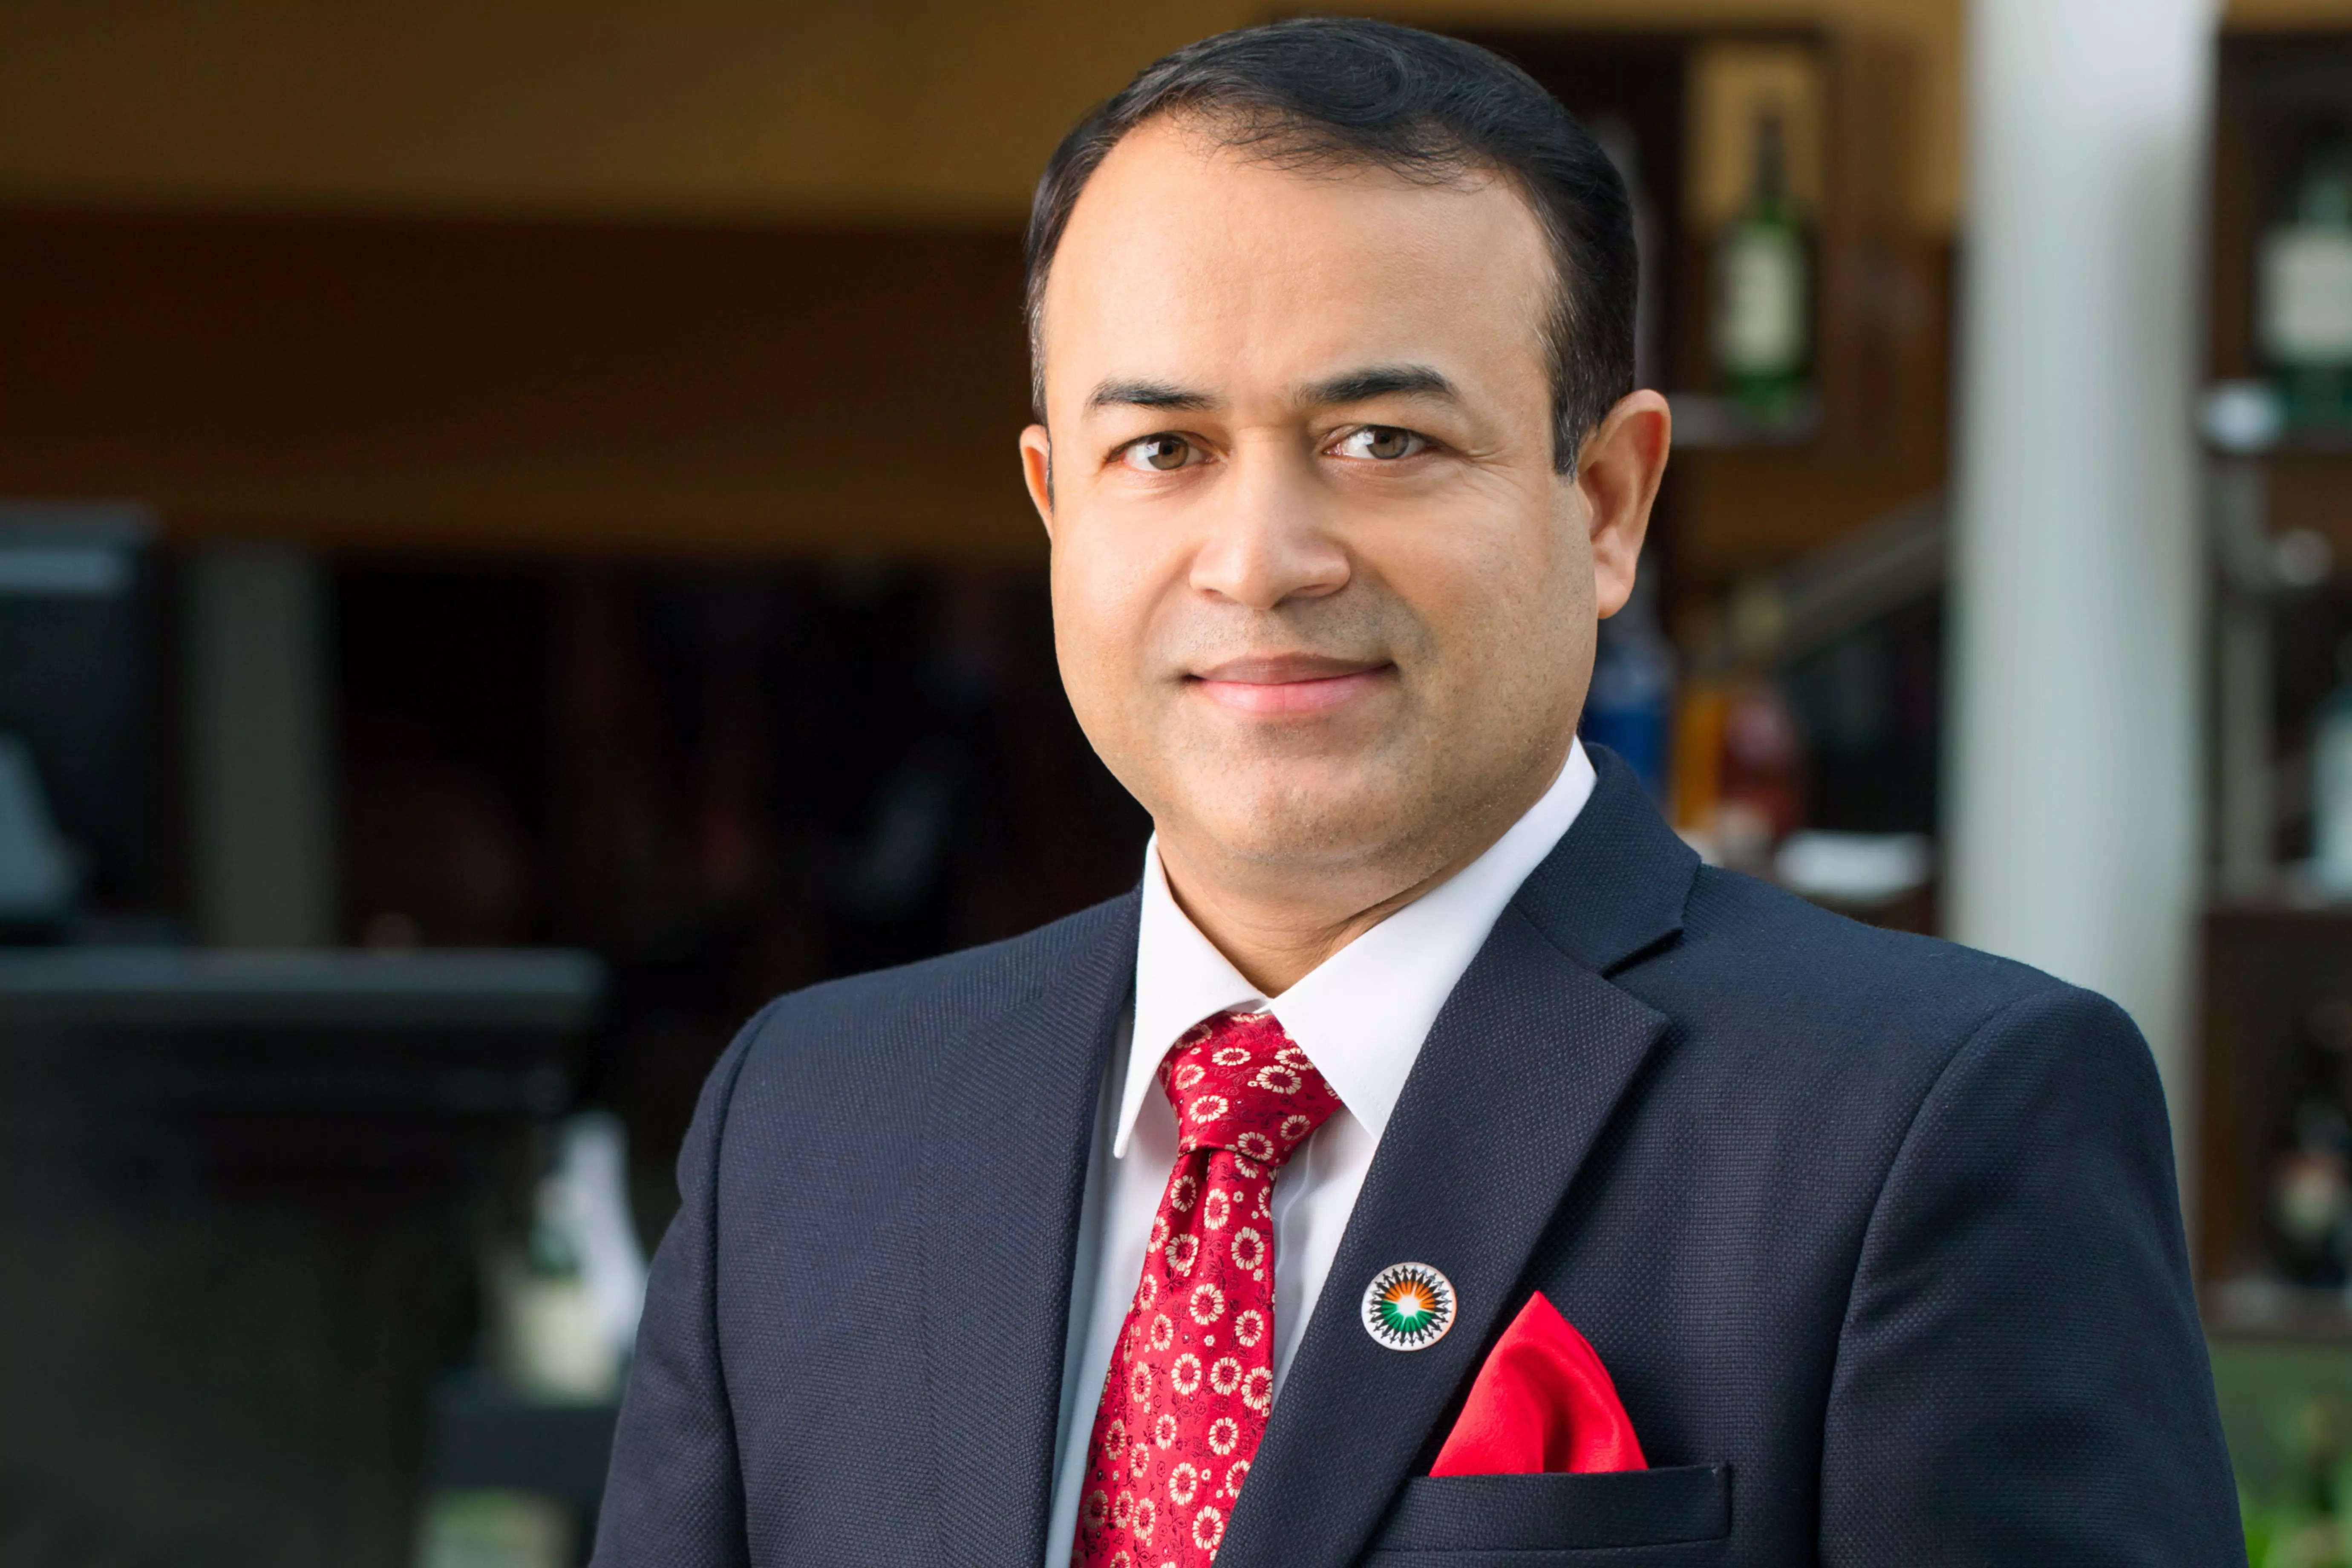 Hotel Sahara Star appoints Salil Fadnis as General Manager